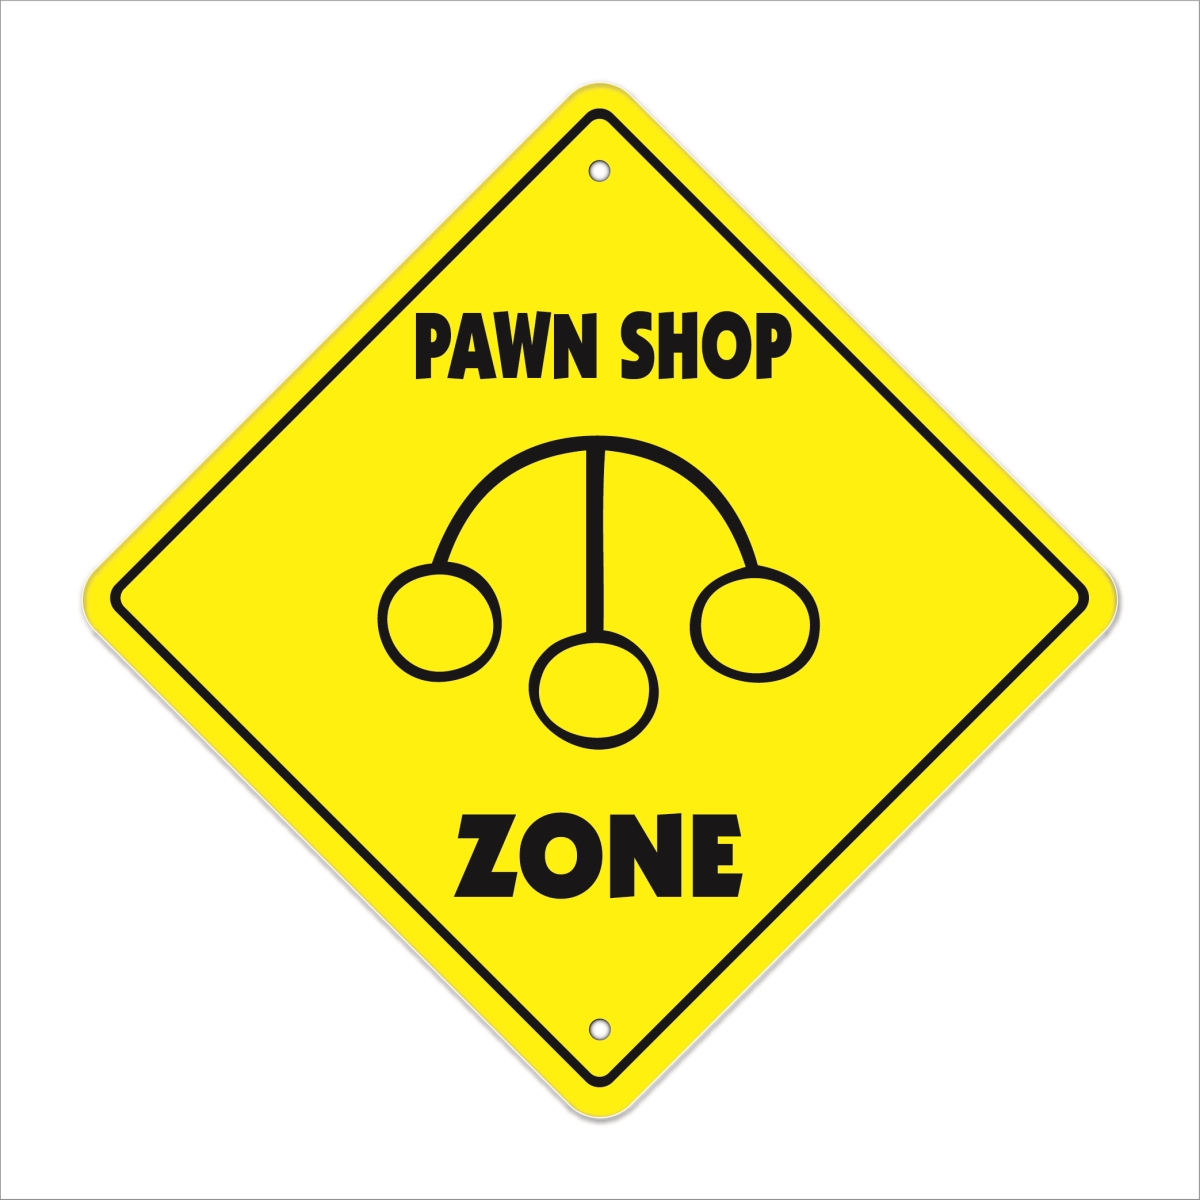 Amistad 12 x 12 in. Zone Xing Crossing Sign - Pawn Shop